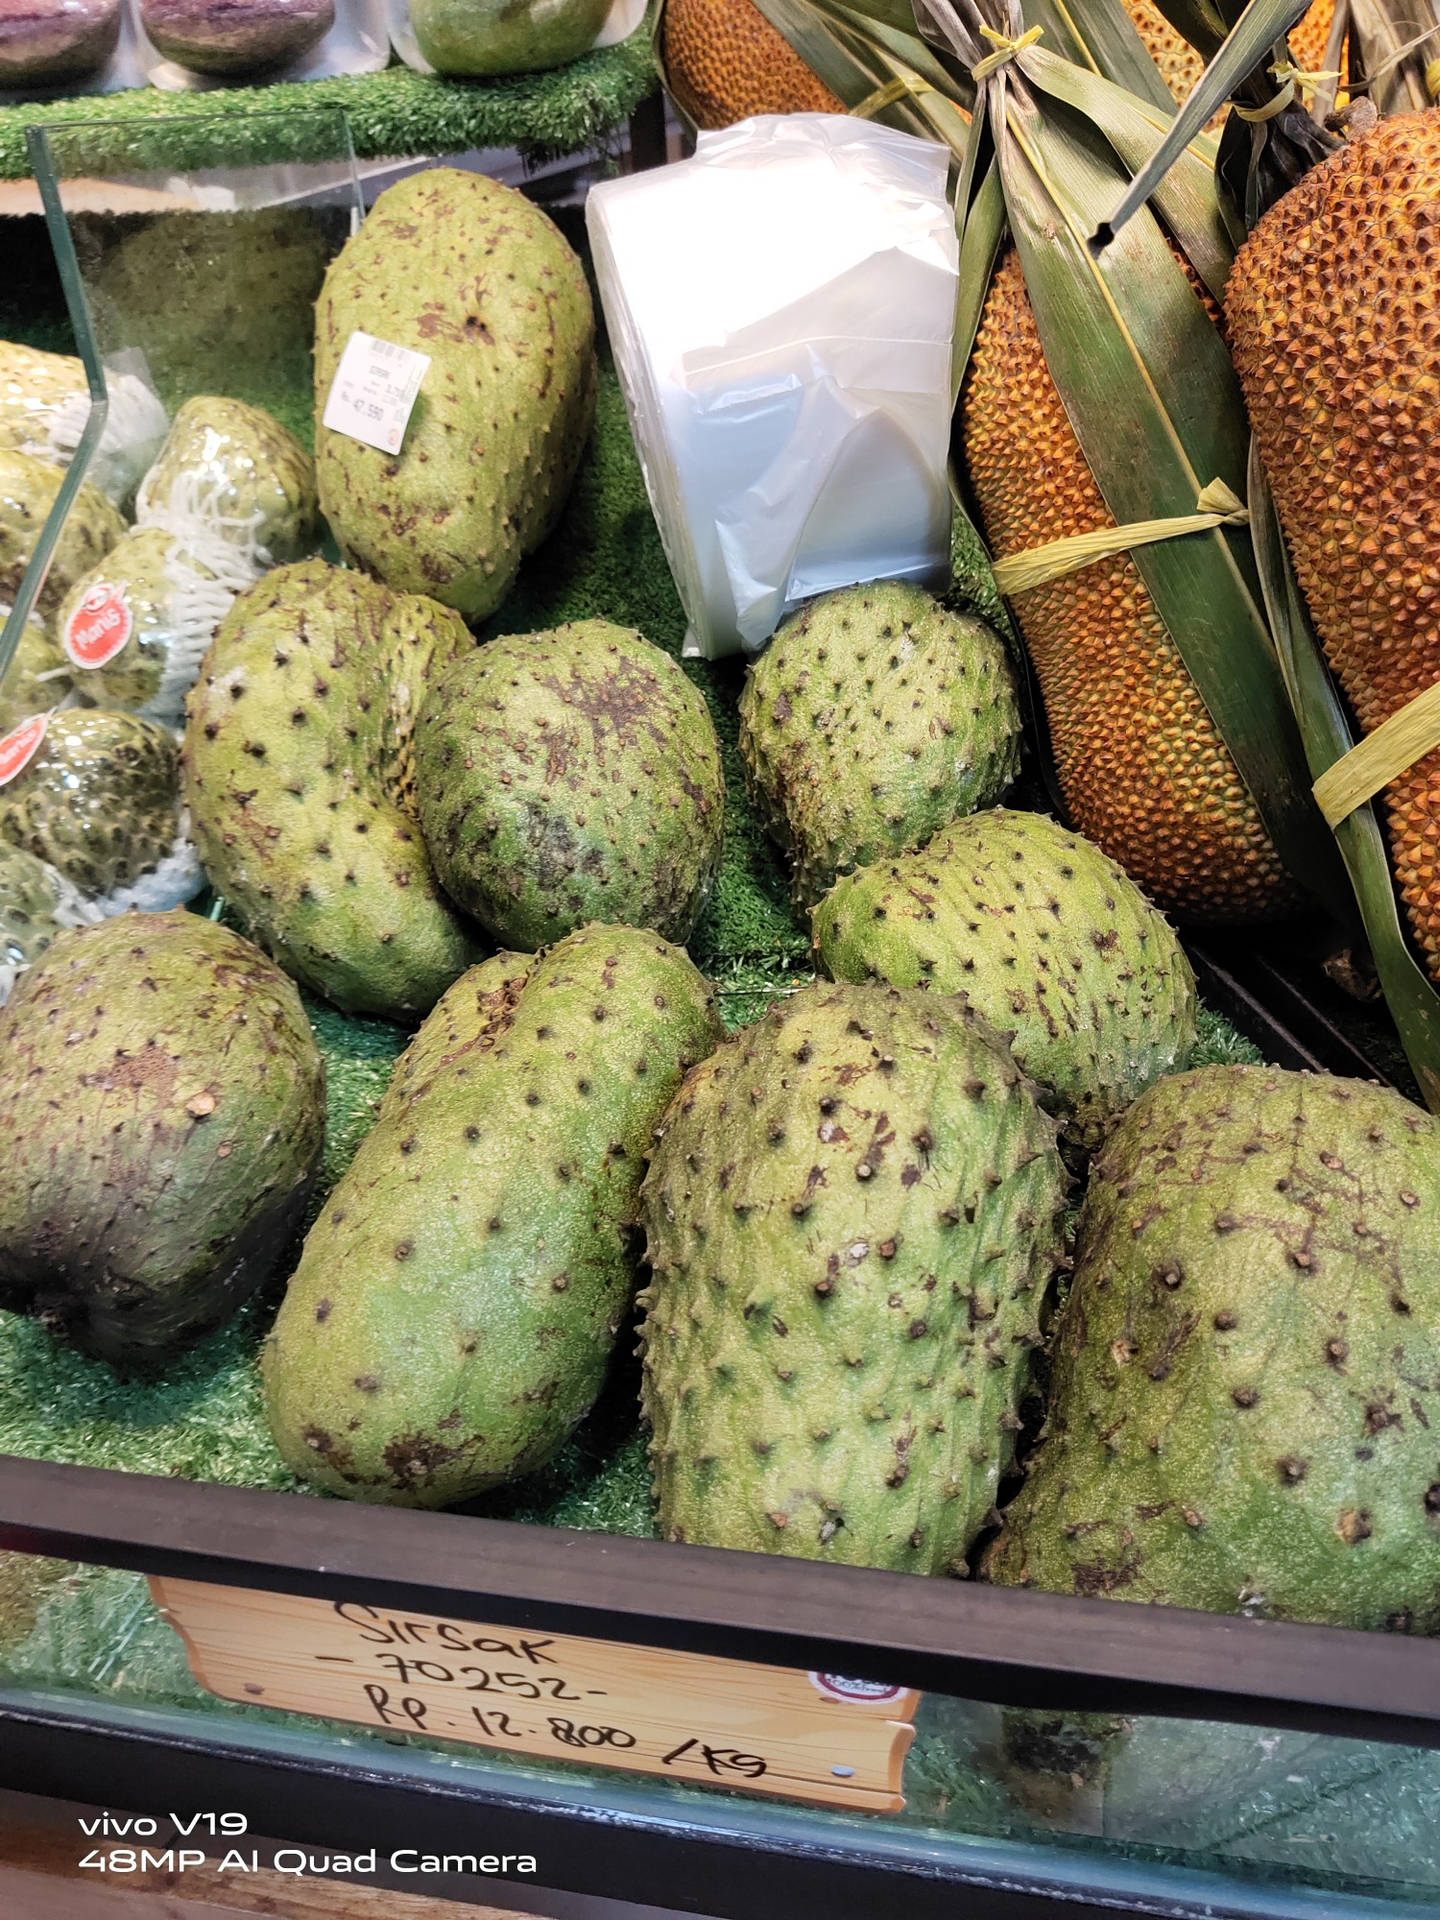 Fresh Soursop Fruits Displayed with Other Fruits at a Market Wallpaper